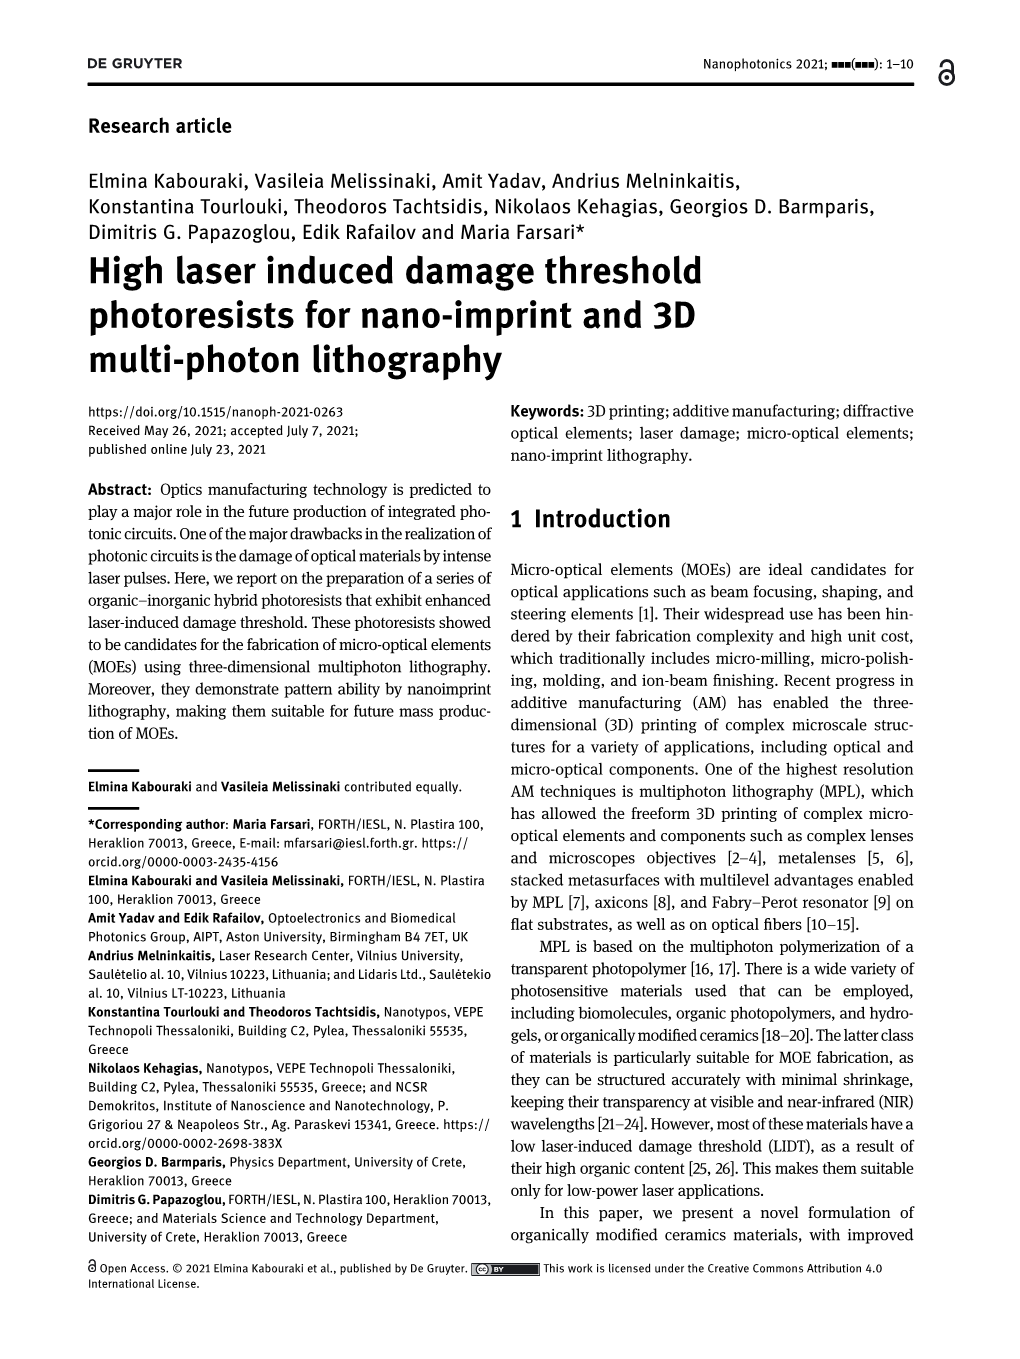 High Laser Induced Damage Threshold Photoresists for Nano-Imprint And